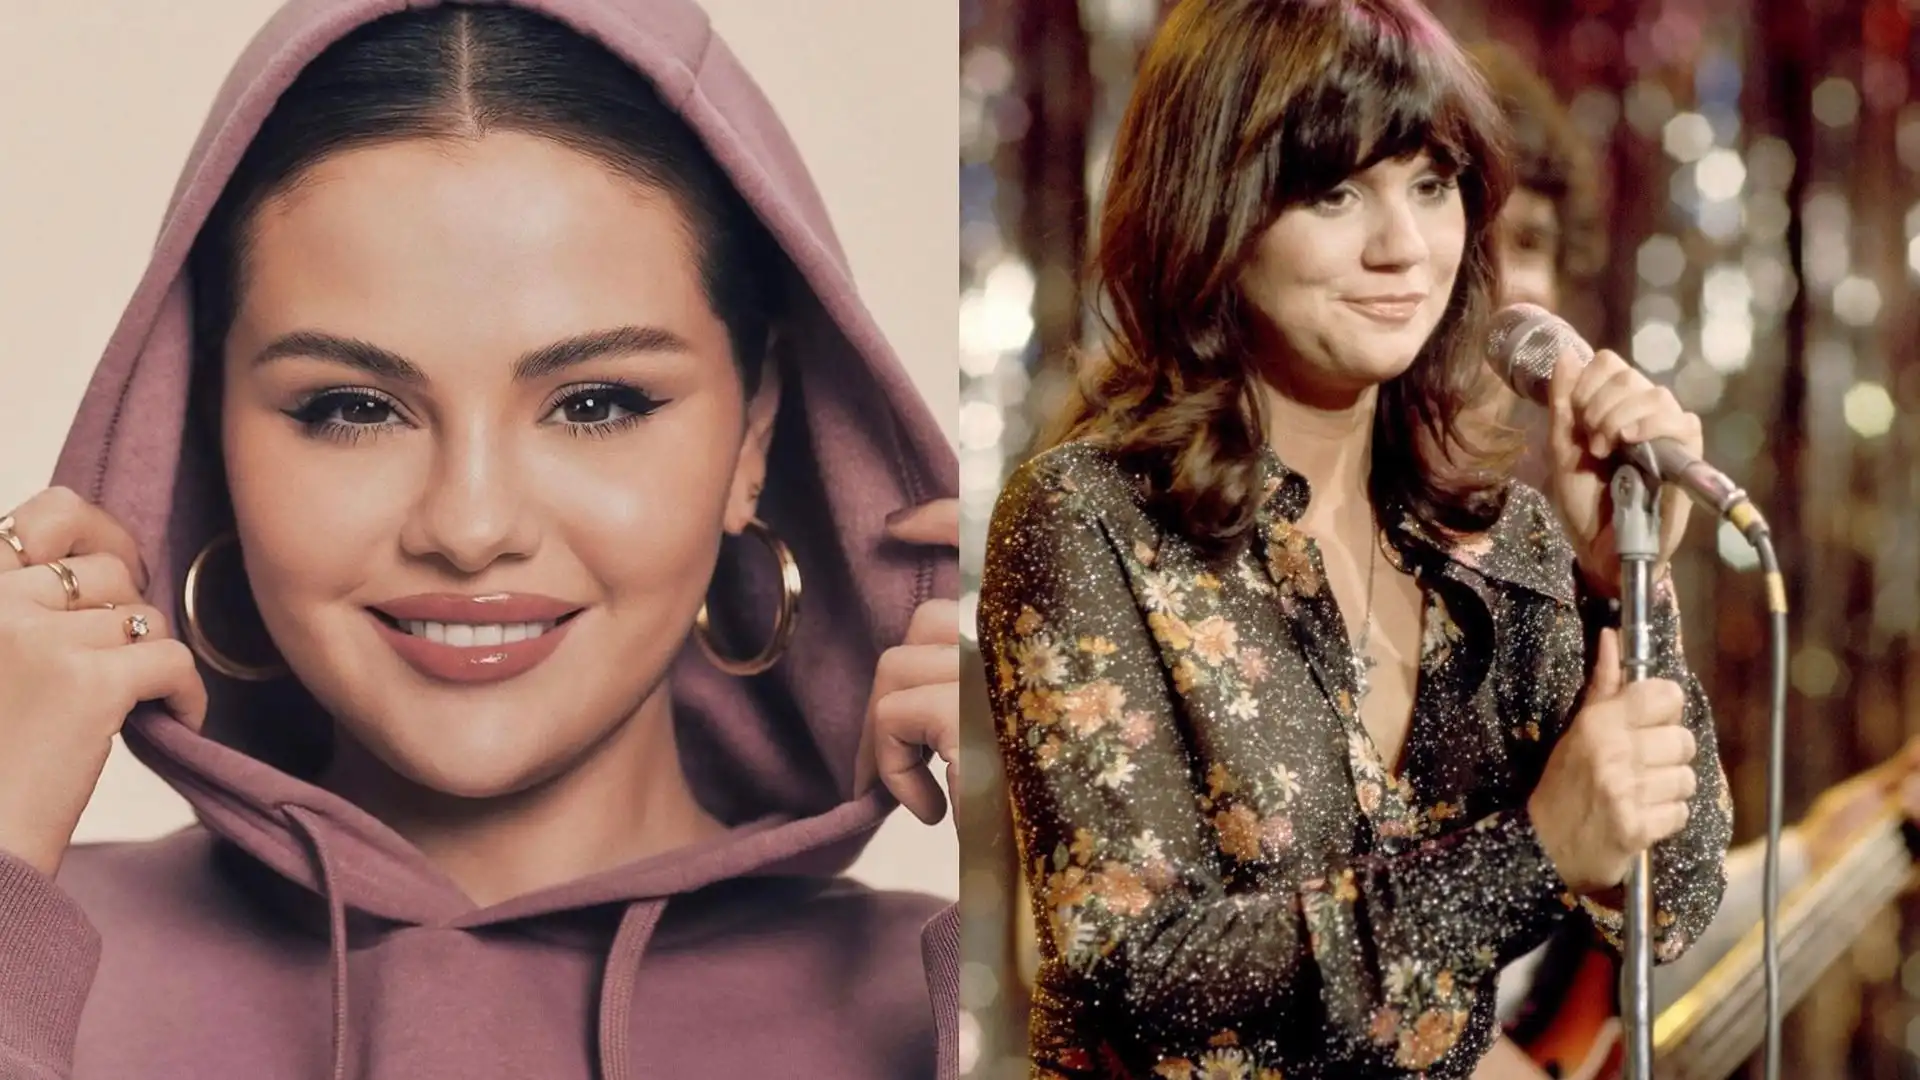 Fans React as Selena Gomez is Cast as Linda Ronstadt for Singer's Biopic: "Great Casting"